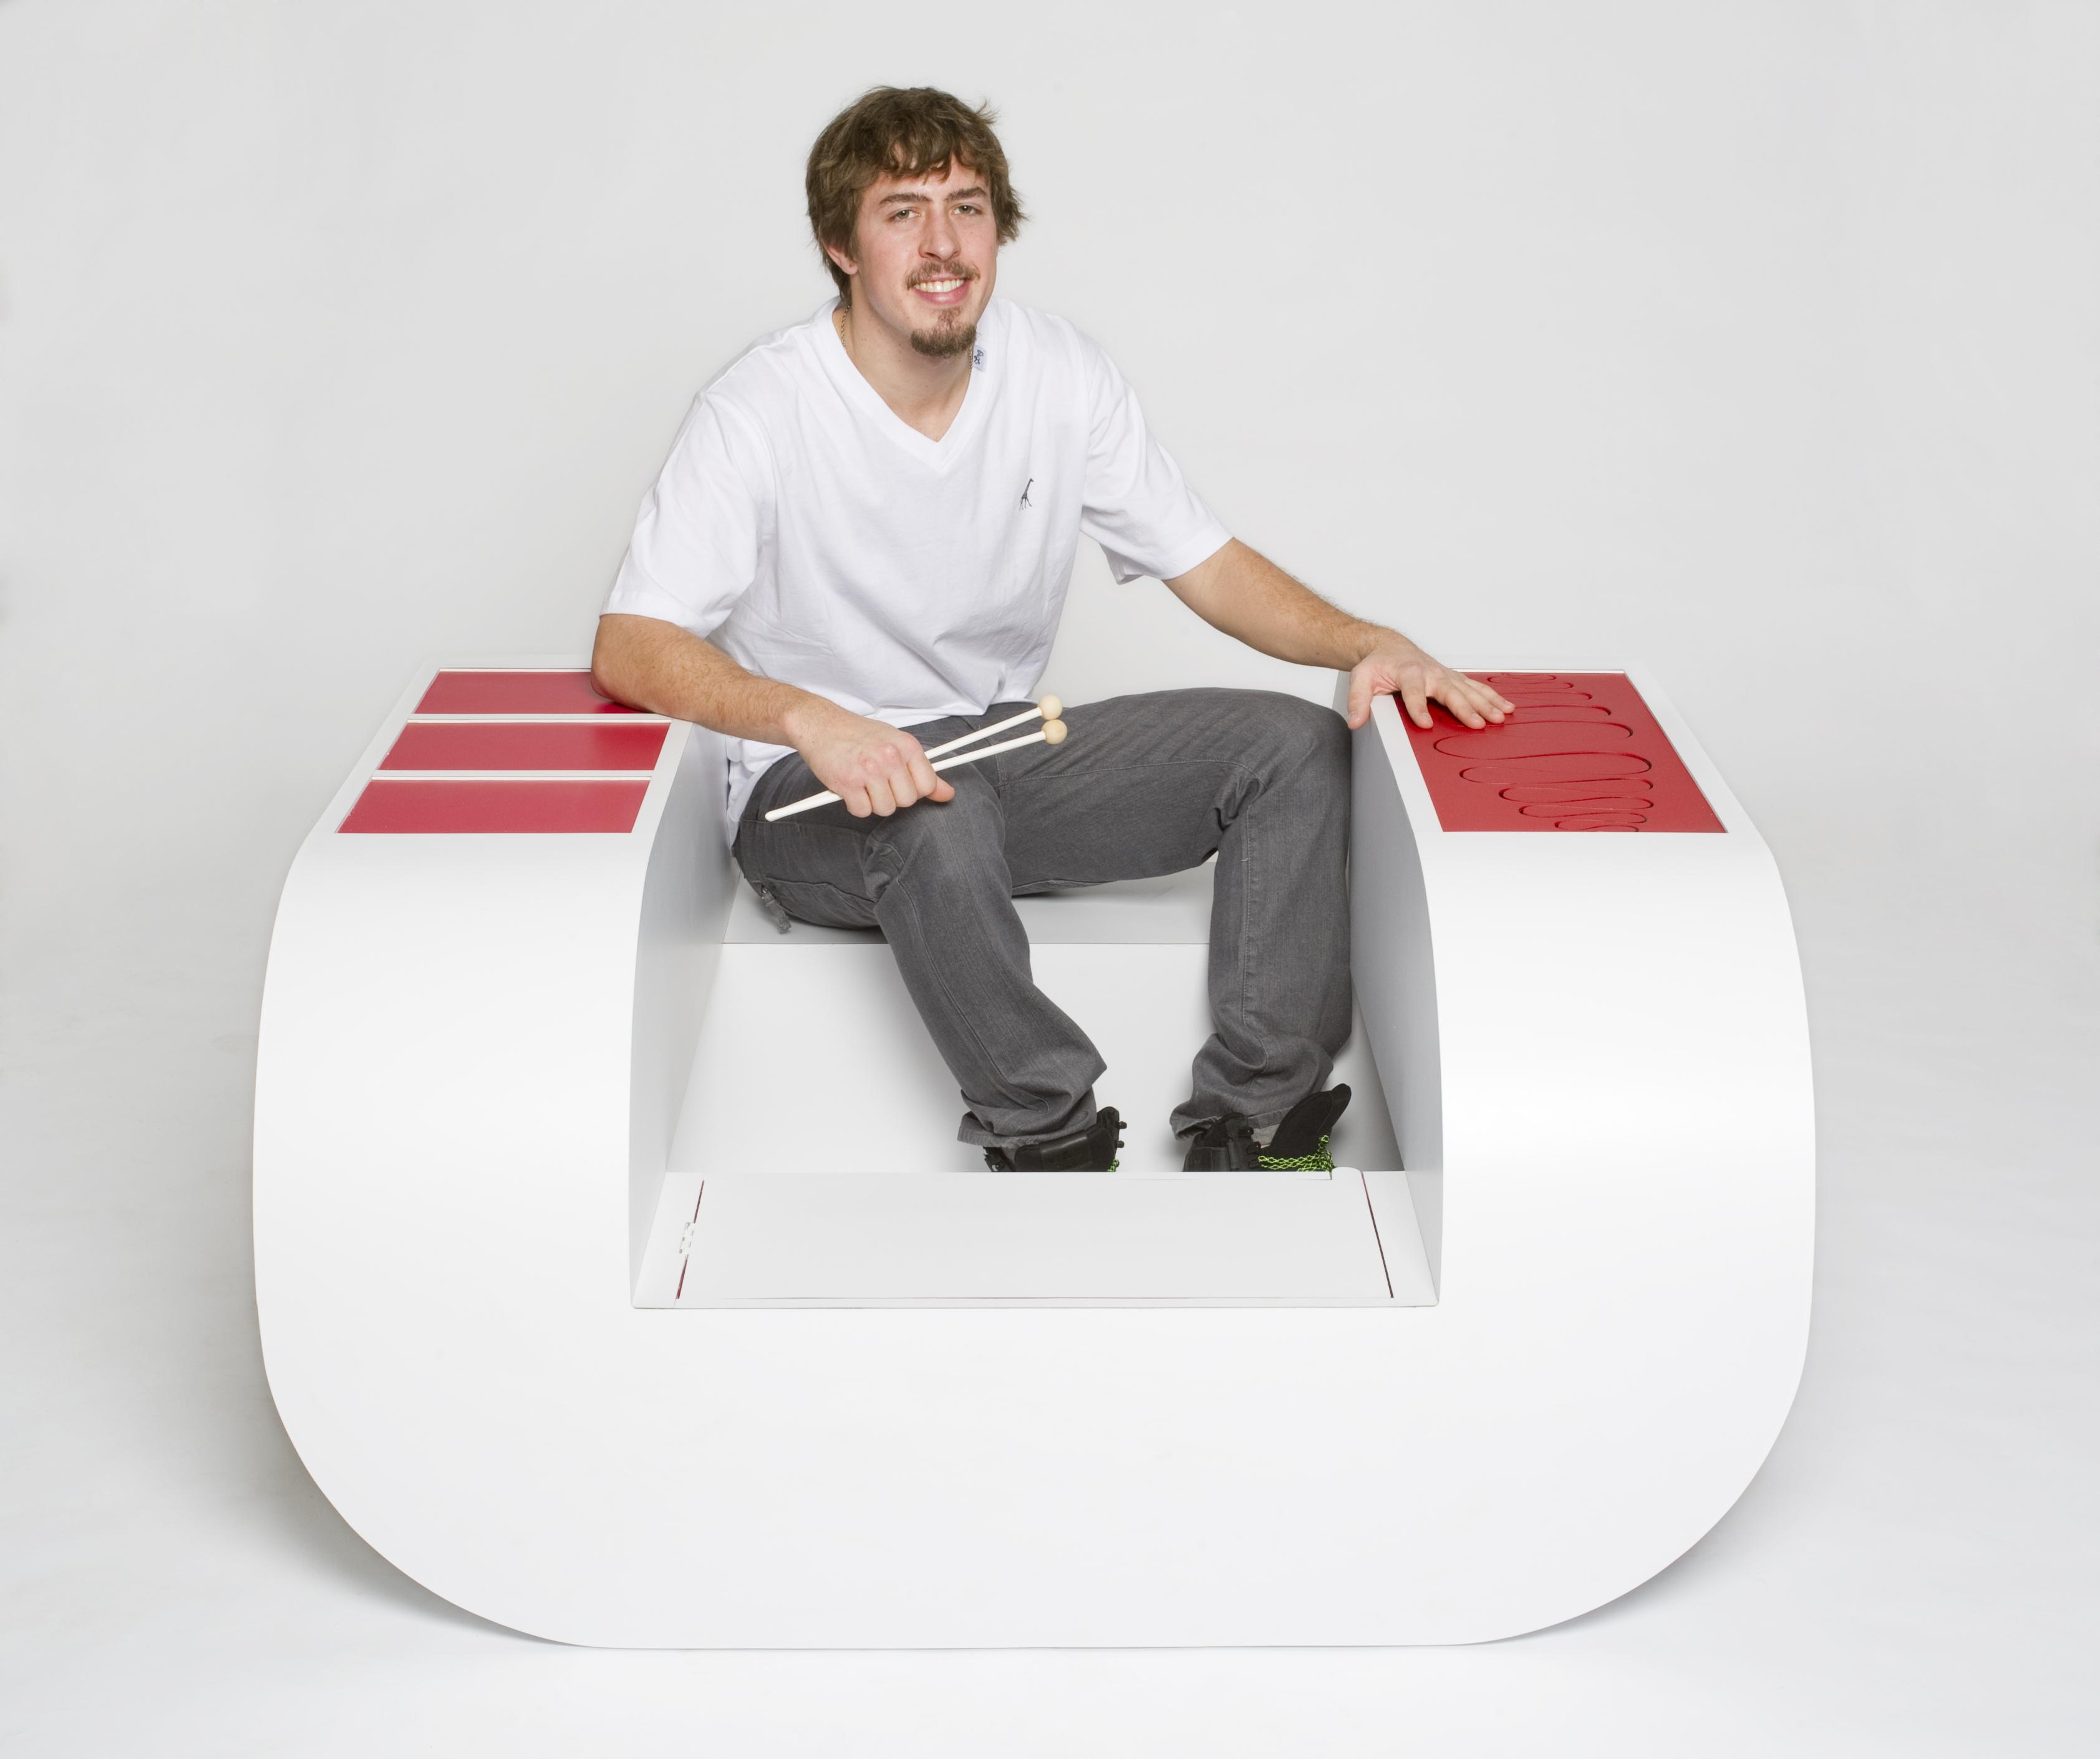 A play bench design being used by a man.